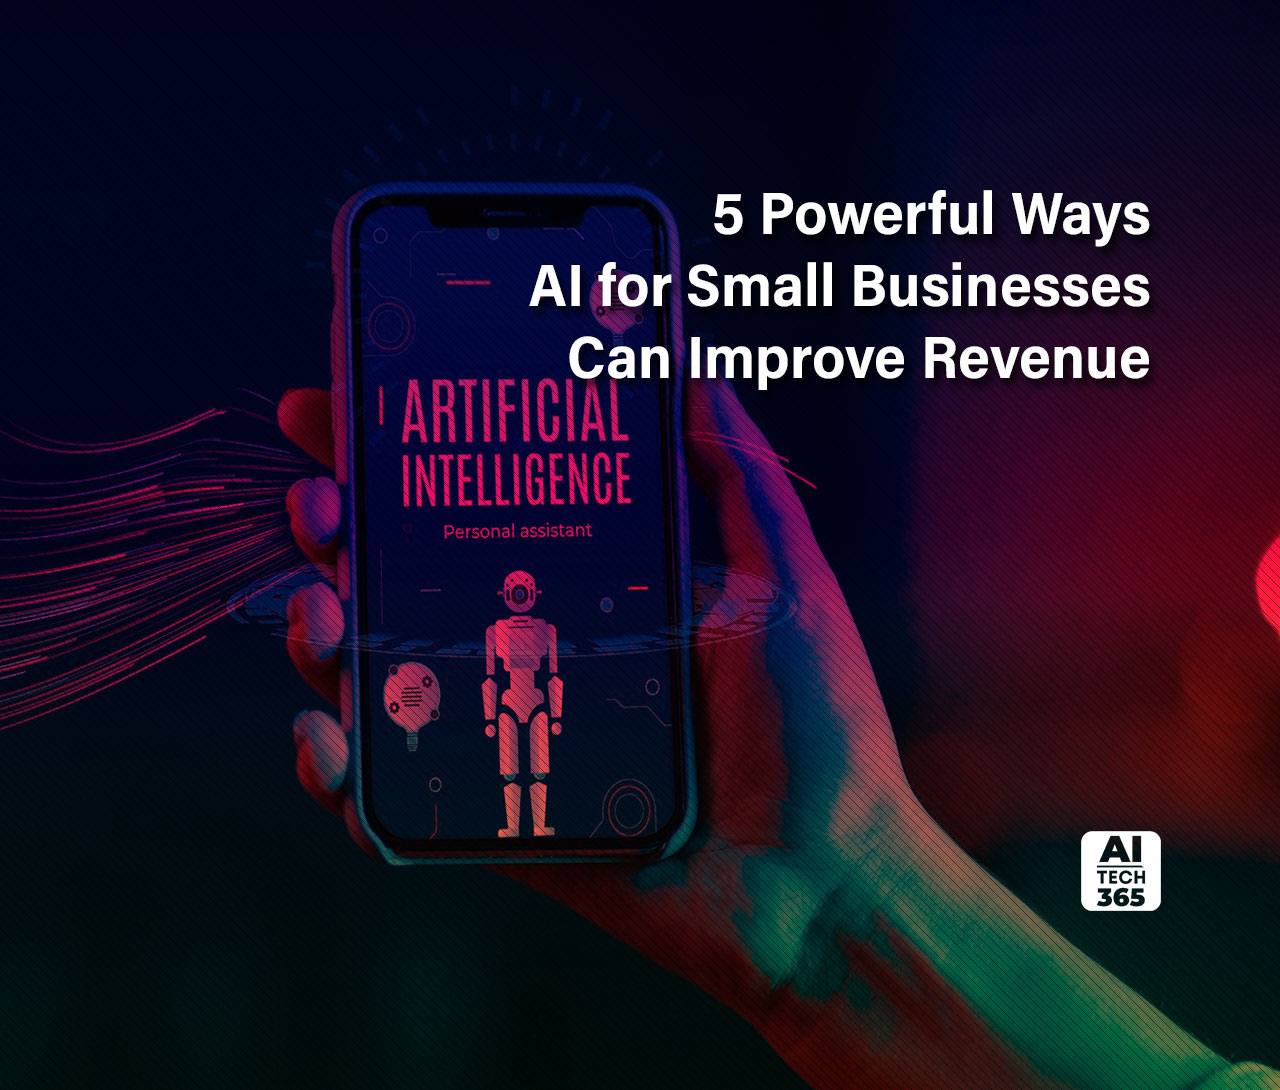 AI for Small Businesses